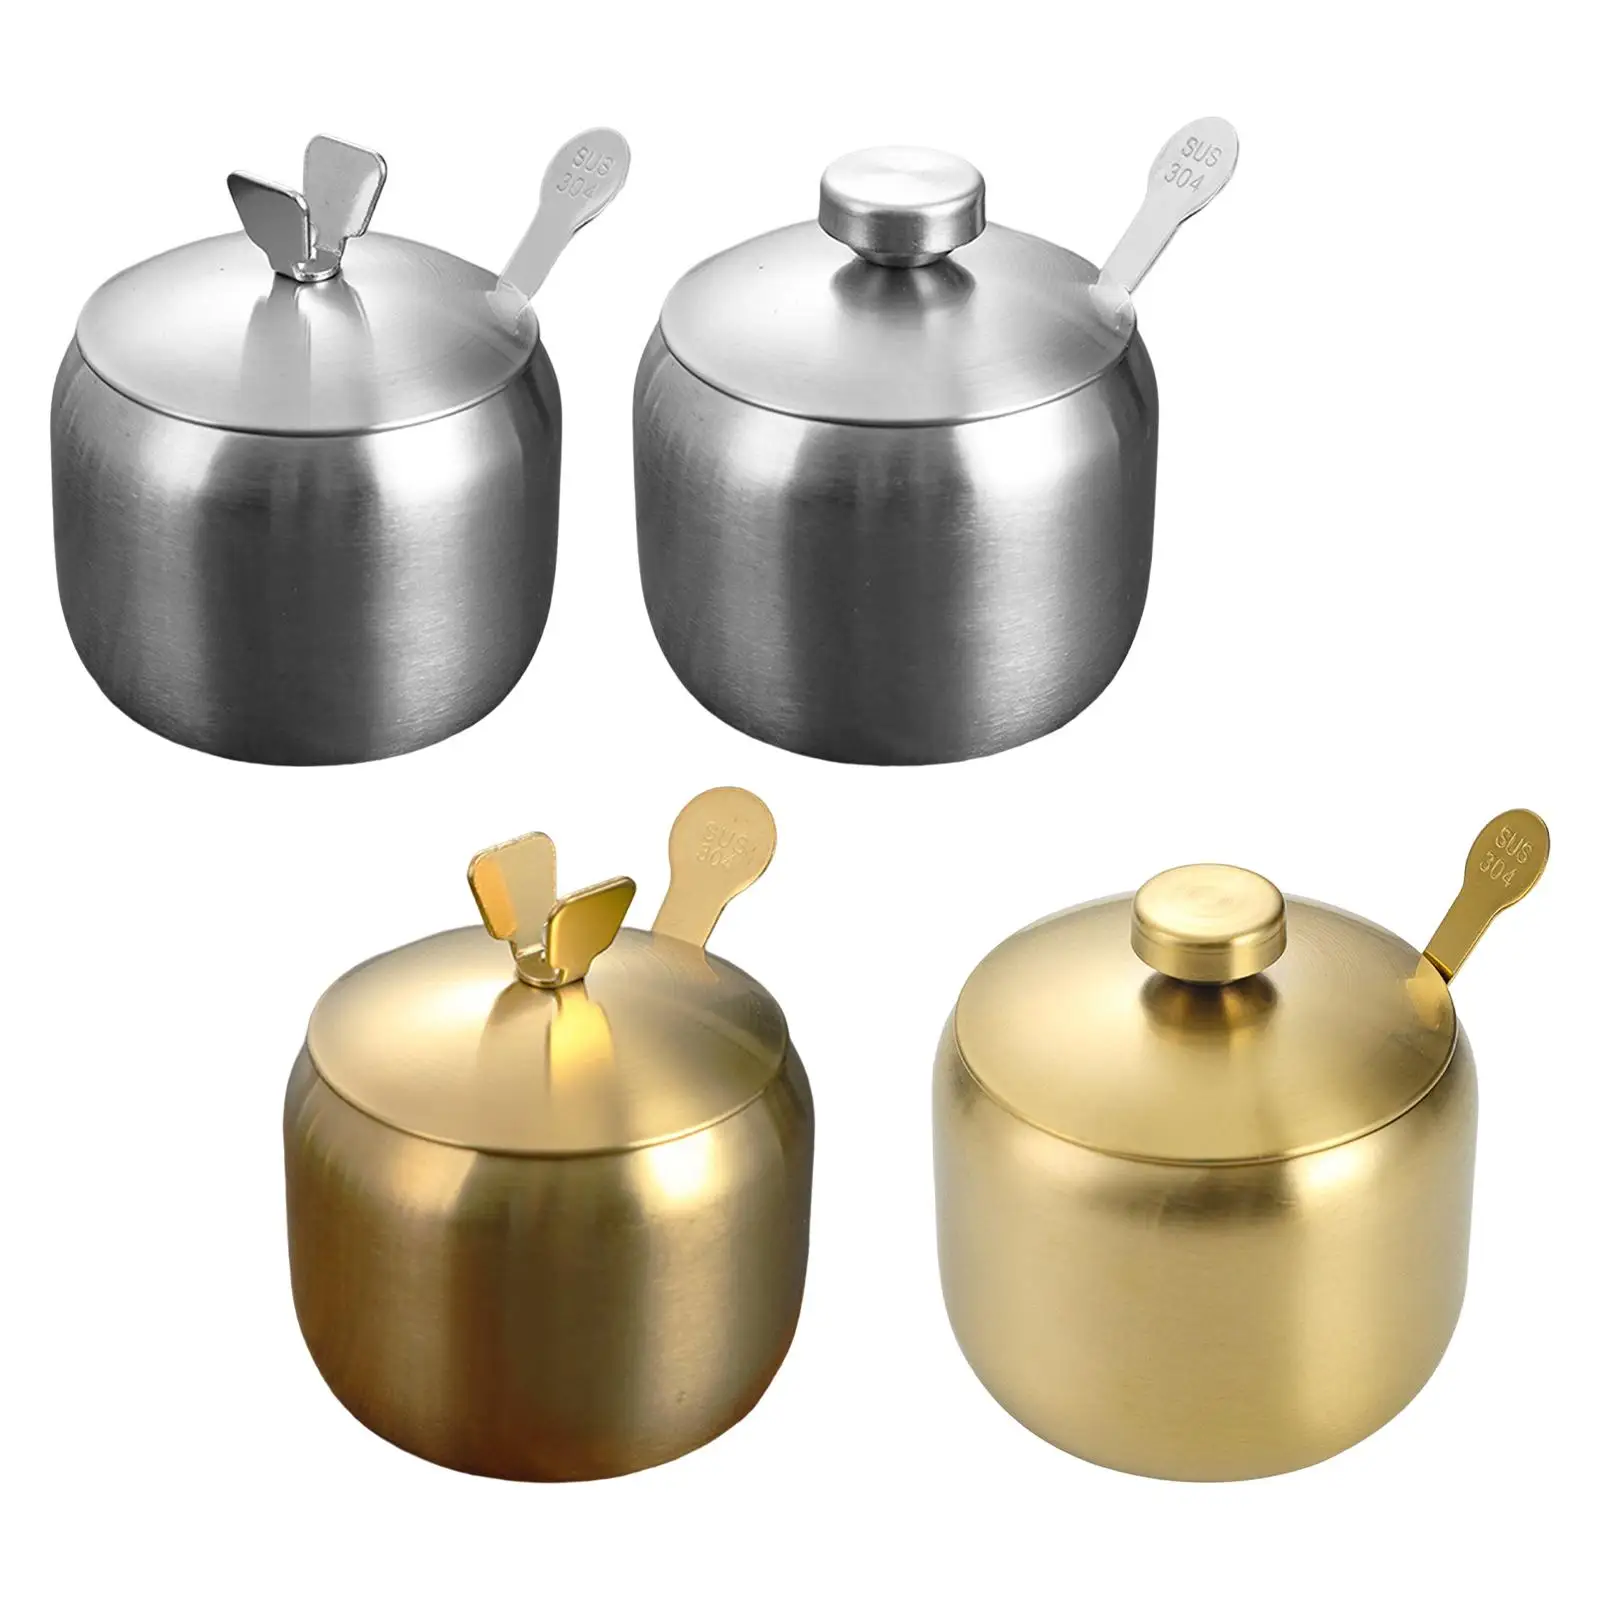 Stainless Steel Seasoning Box Kitchen Utensil Condiment Jar Spice Pots with Lid and Spoon for Pepper